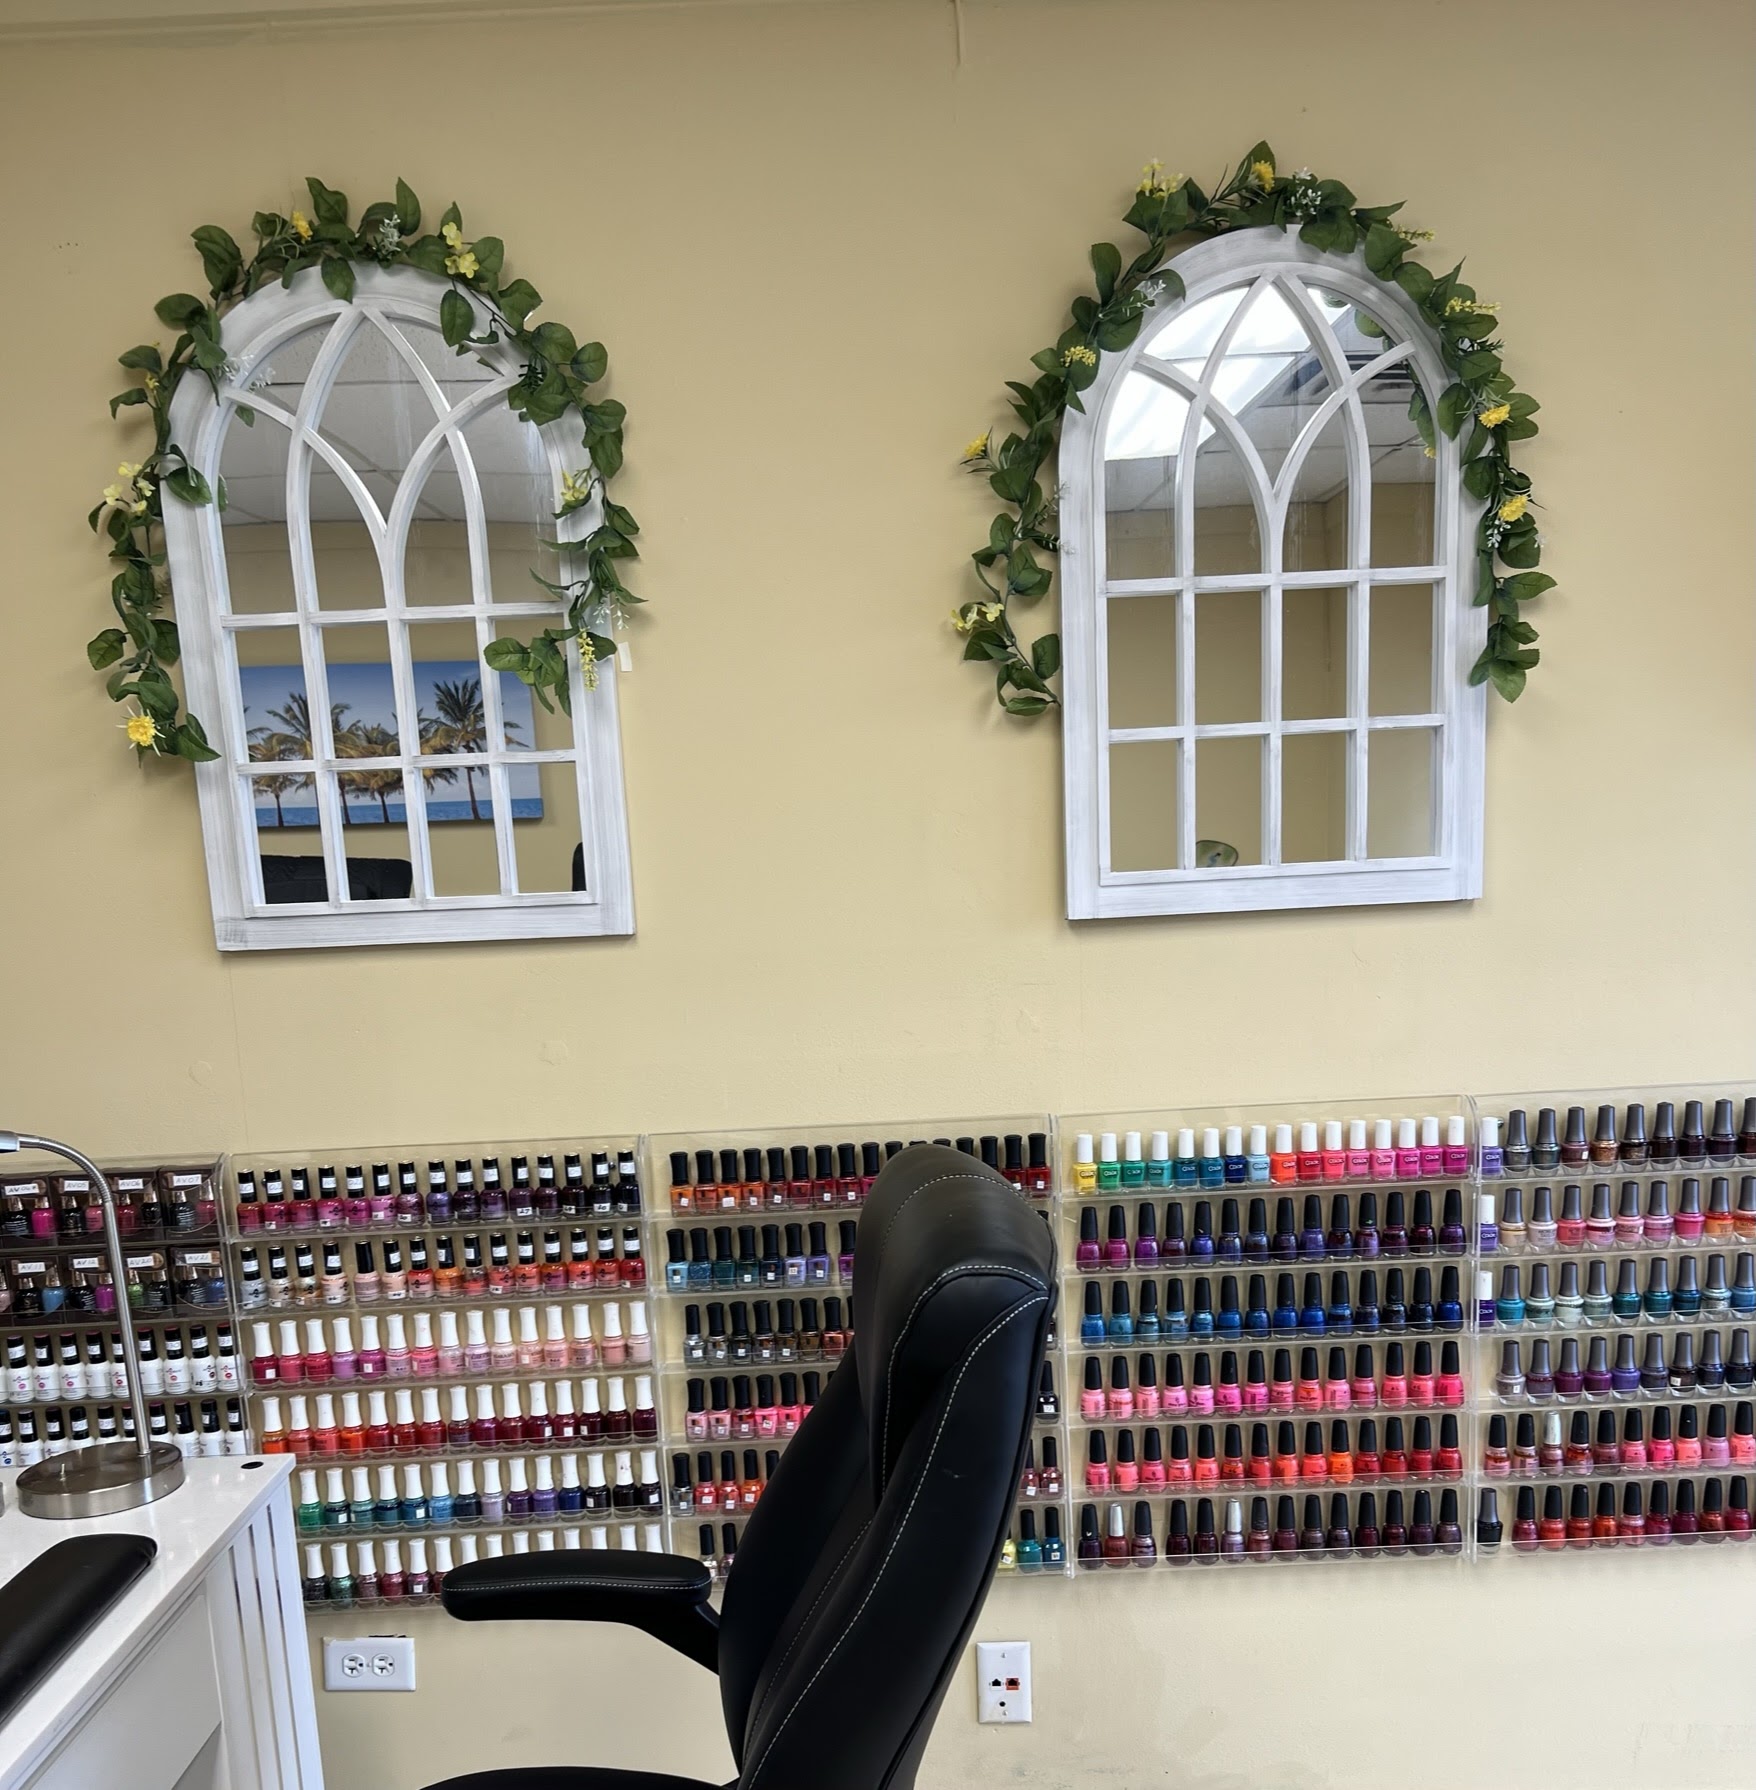 Angel Nails & Waxing 4815 155th St, Oak Forest Illinois 60452